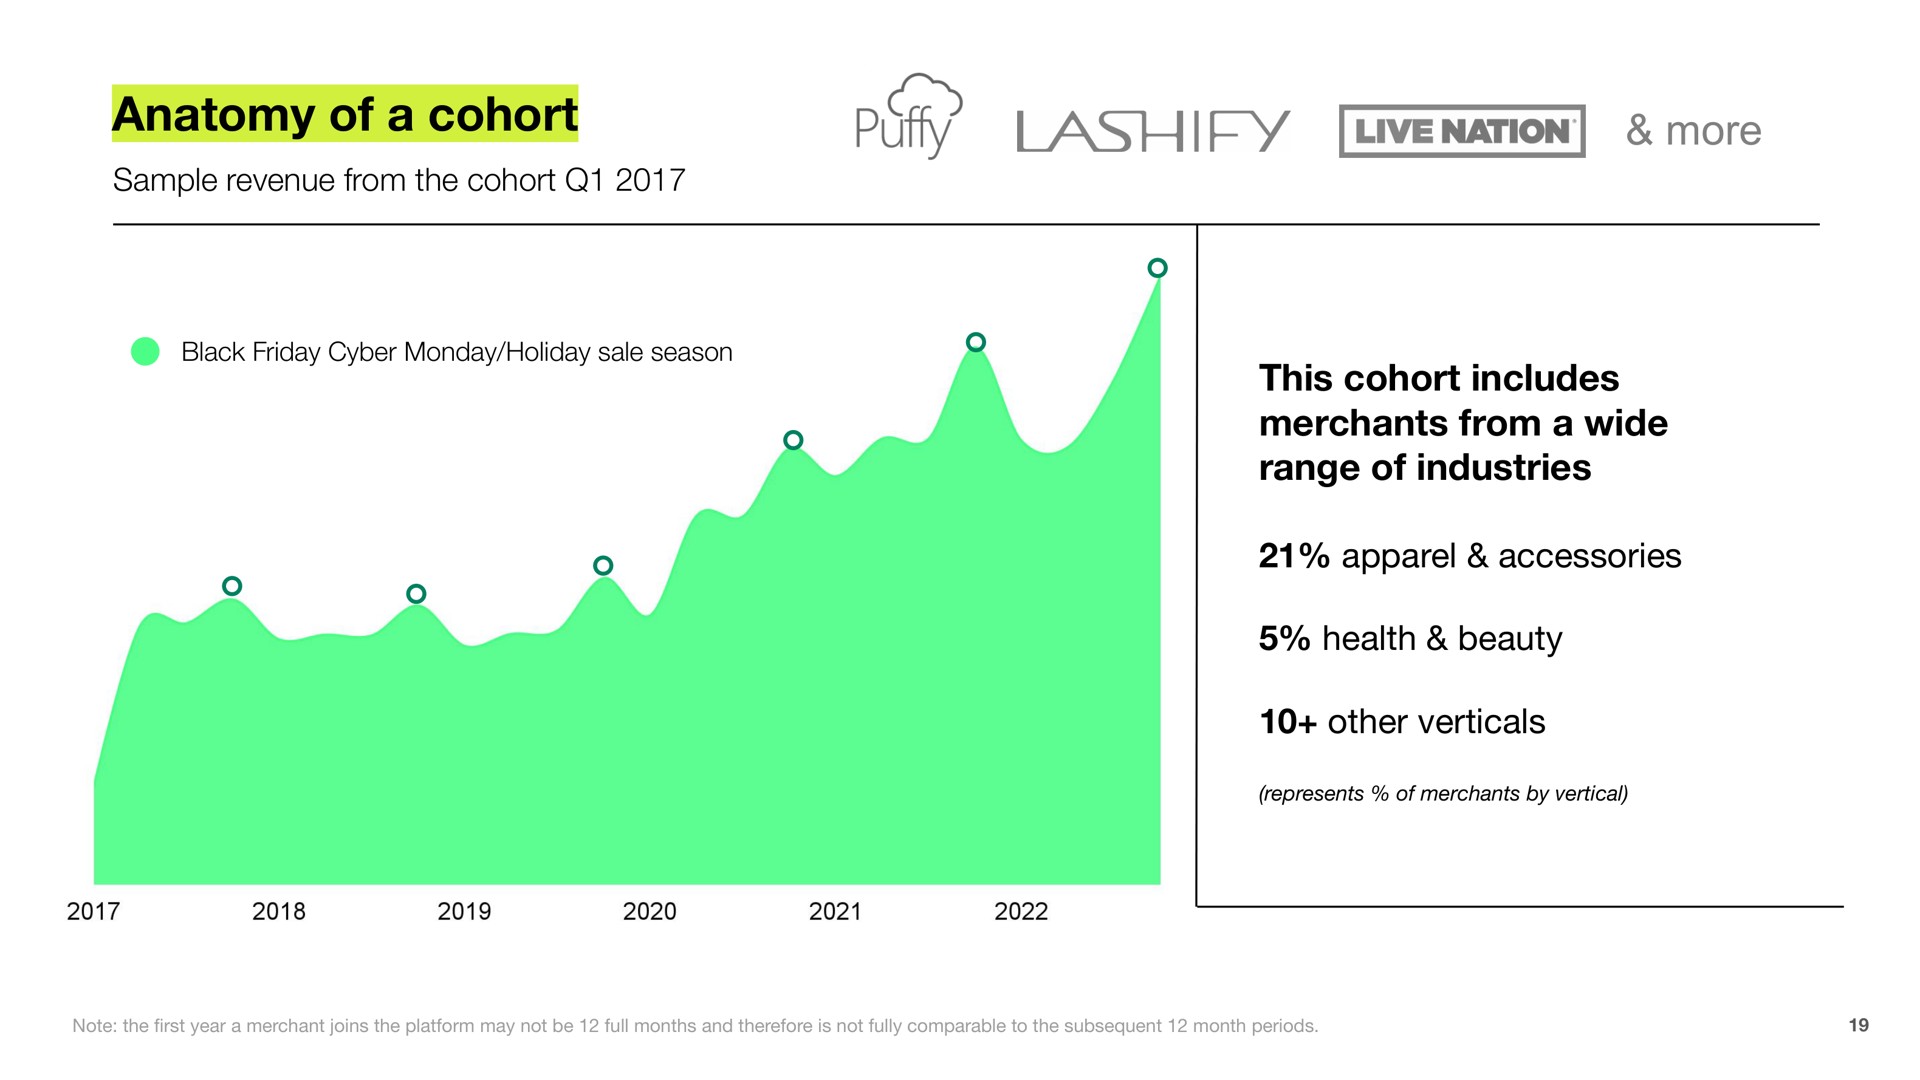 anatomy of a cohort more this cohort includes merchants from a wide range of industries poy | Shopify